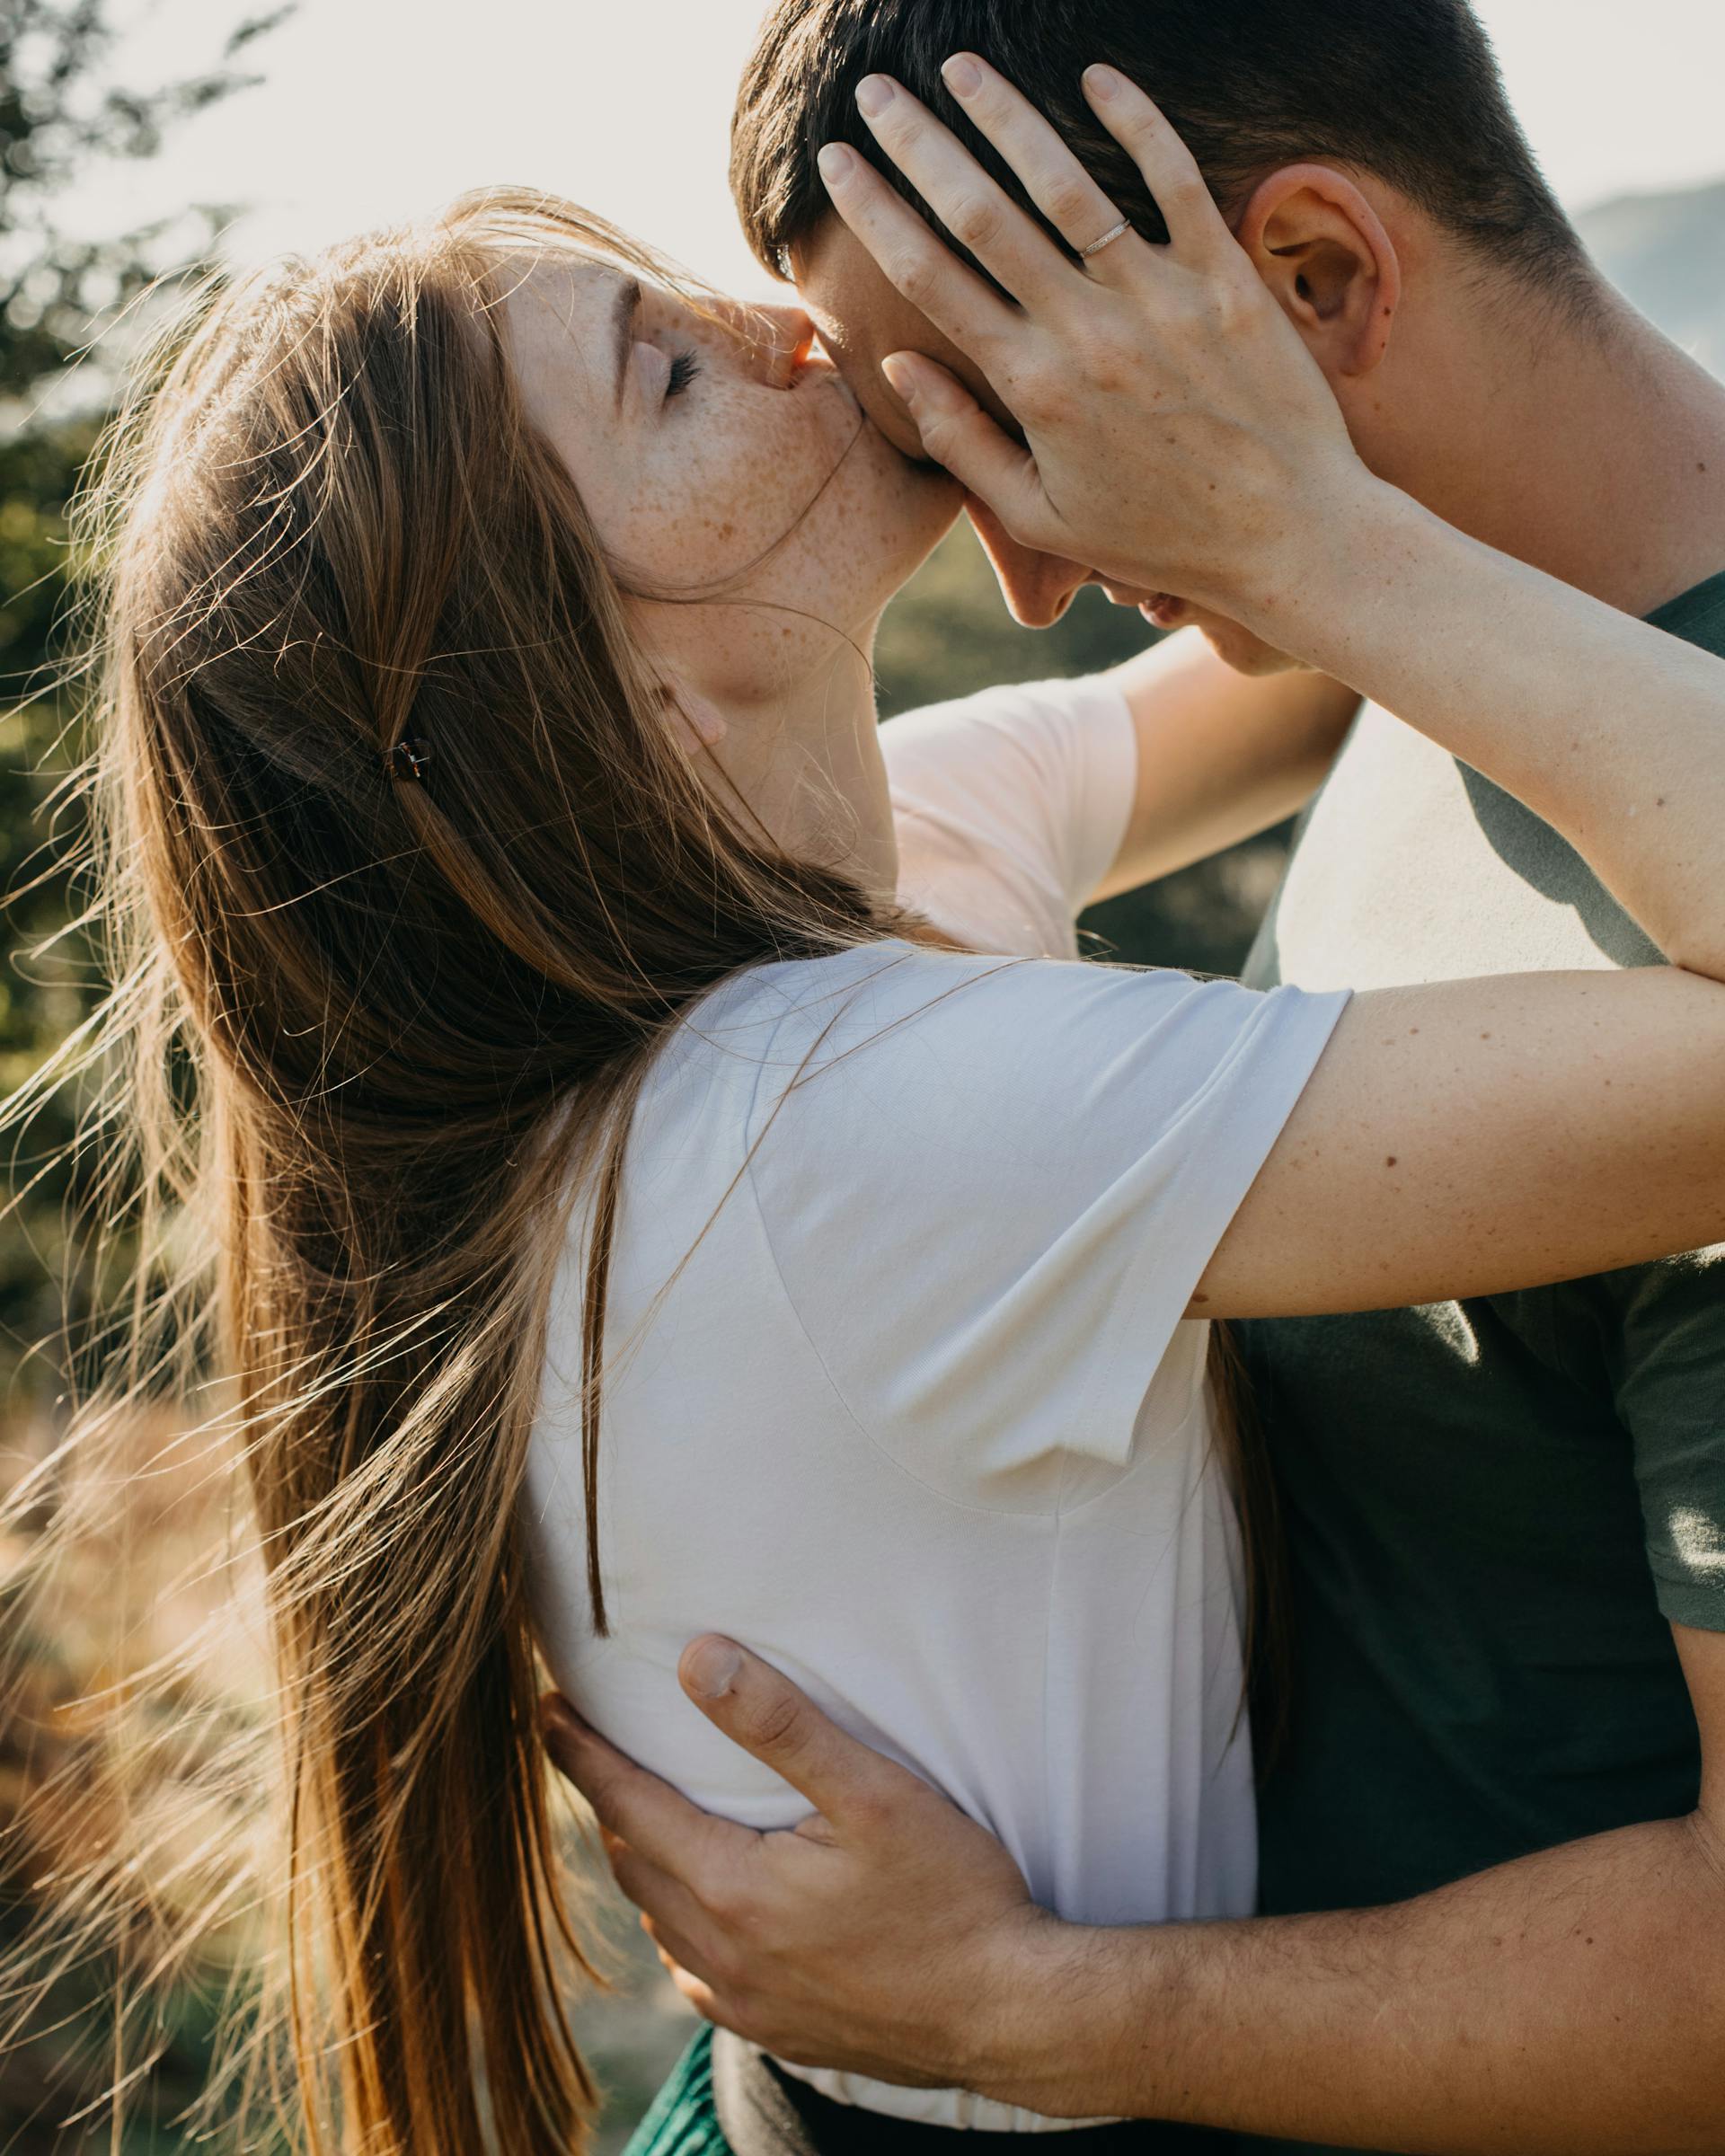 A couple kissing her boyfriend on the forehead | Source: Pexels